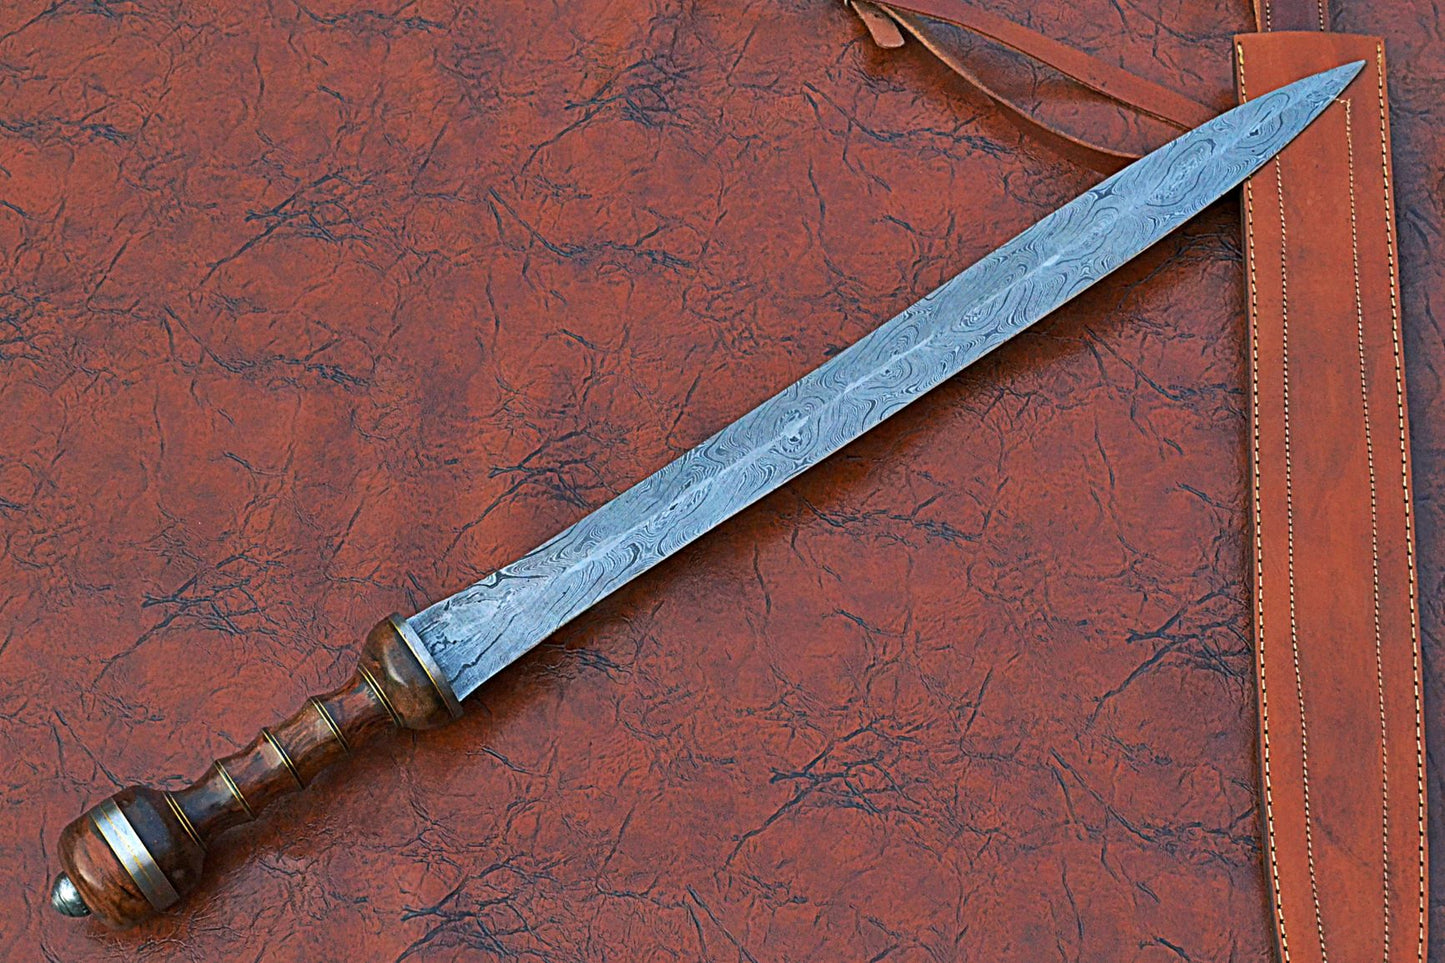 29 inches Long Maximus Gladuis Sword, 21" Long Hand Forged Damascus Steel Double Edge Blade, Hand Crafted Walnut Wood Grip with Brass Spacer, Leather Scabbard with Shoulder Stripe